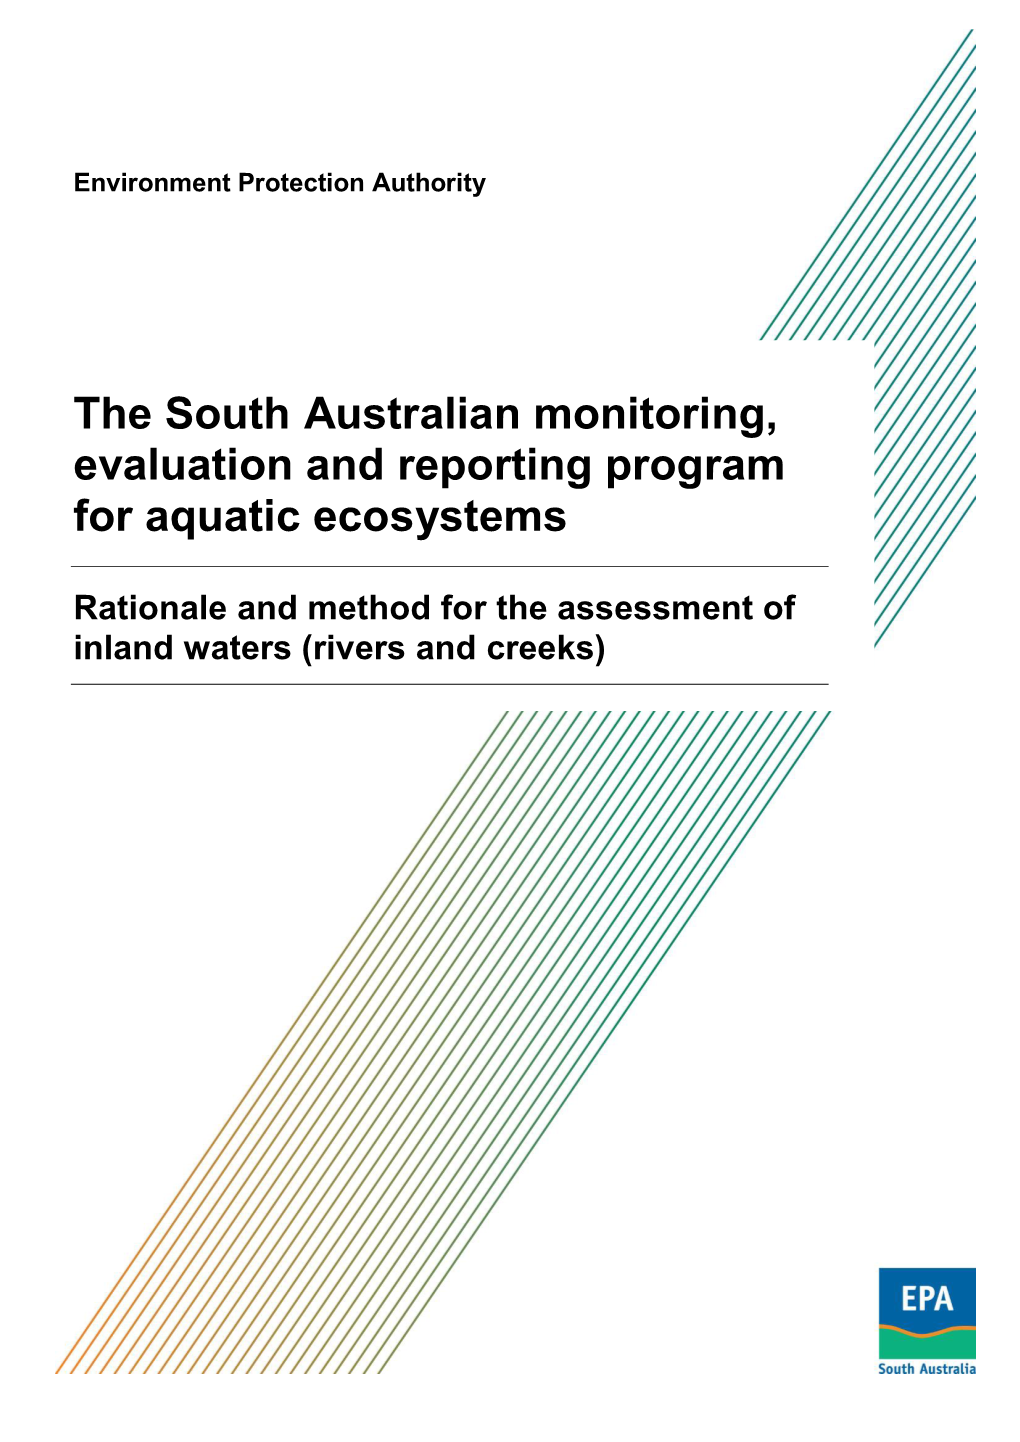 The South Australian Monitoring, Evaluation and Reporting Program for Aquatic Ecosystems